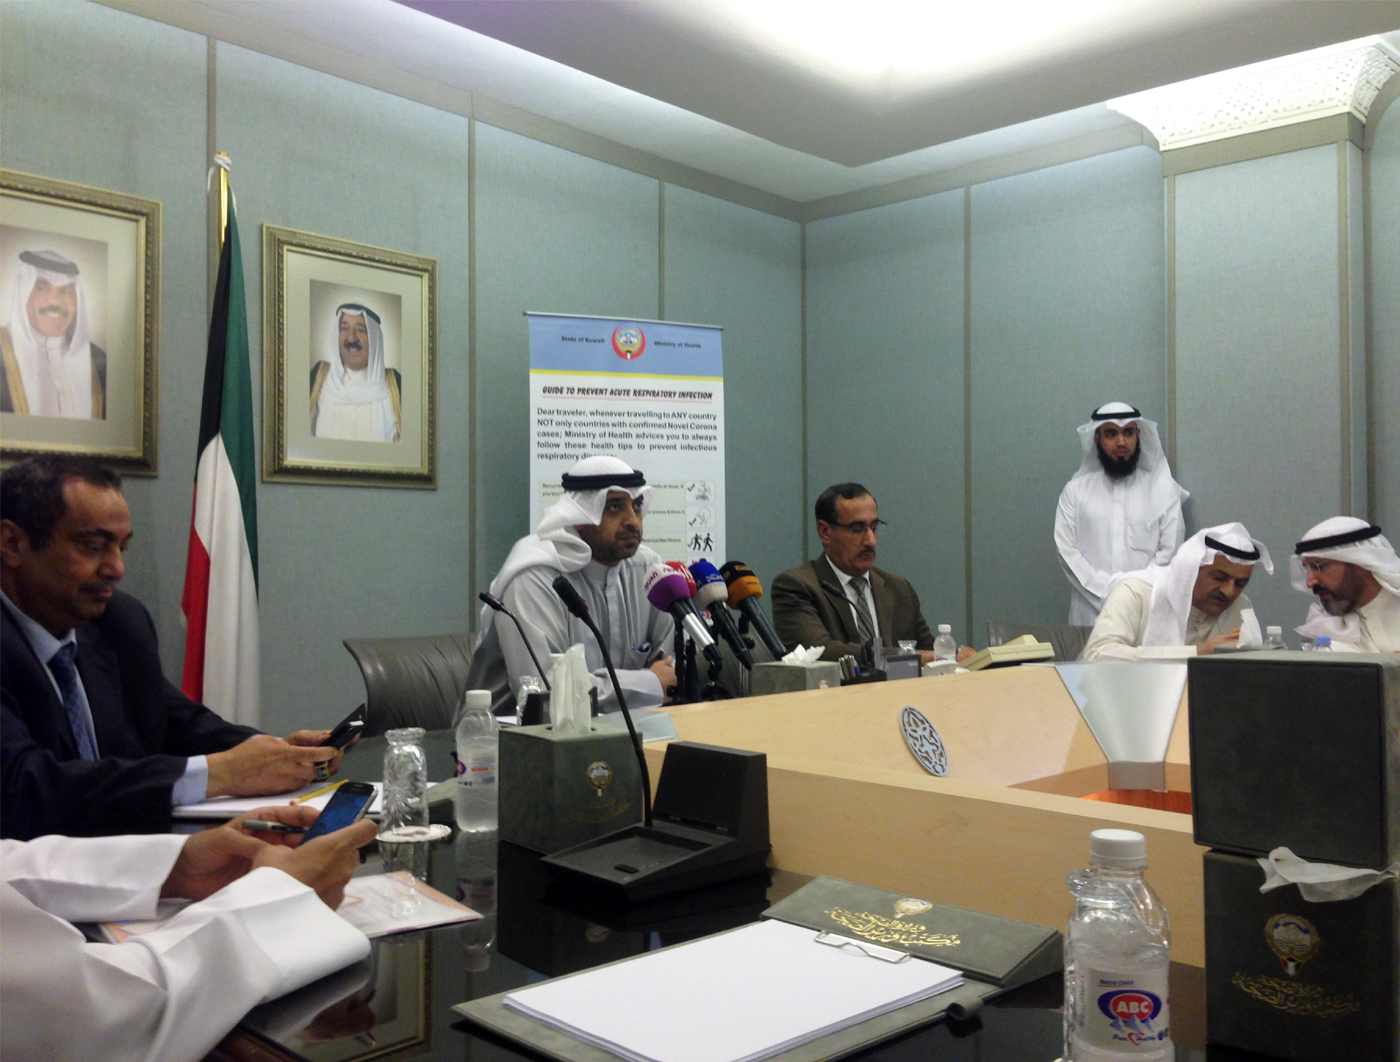 Minister of State for Cabinet Affairs and Health Minister Sheikh Mohammad Abdullah Al-Mubarak Al-Sabah in a press conference